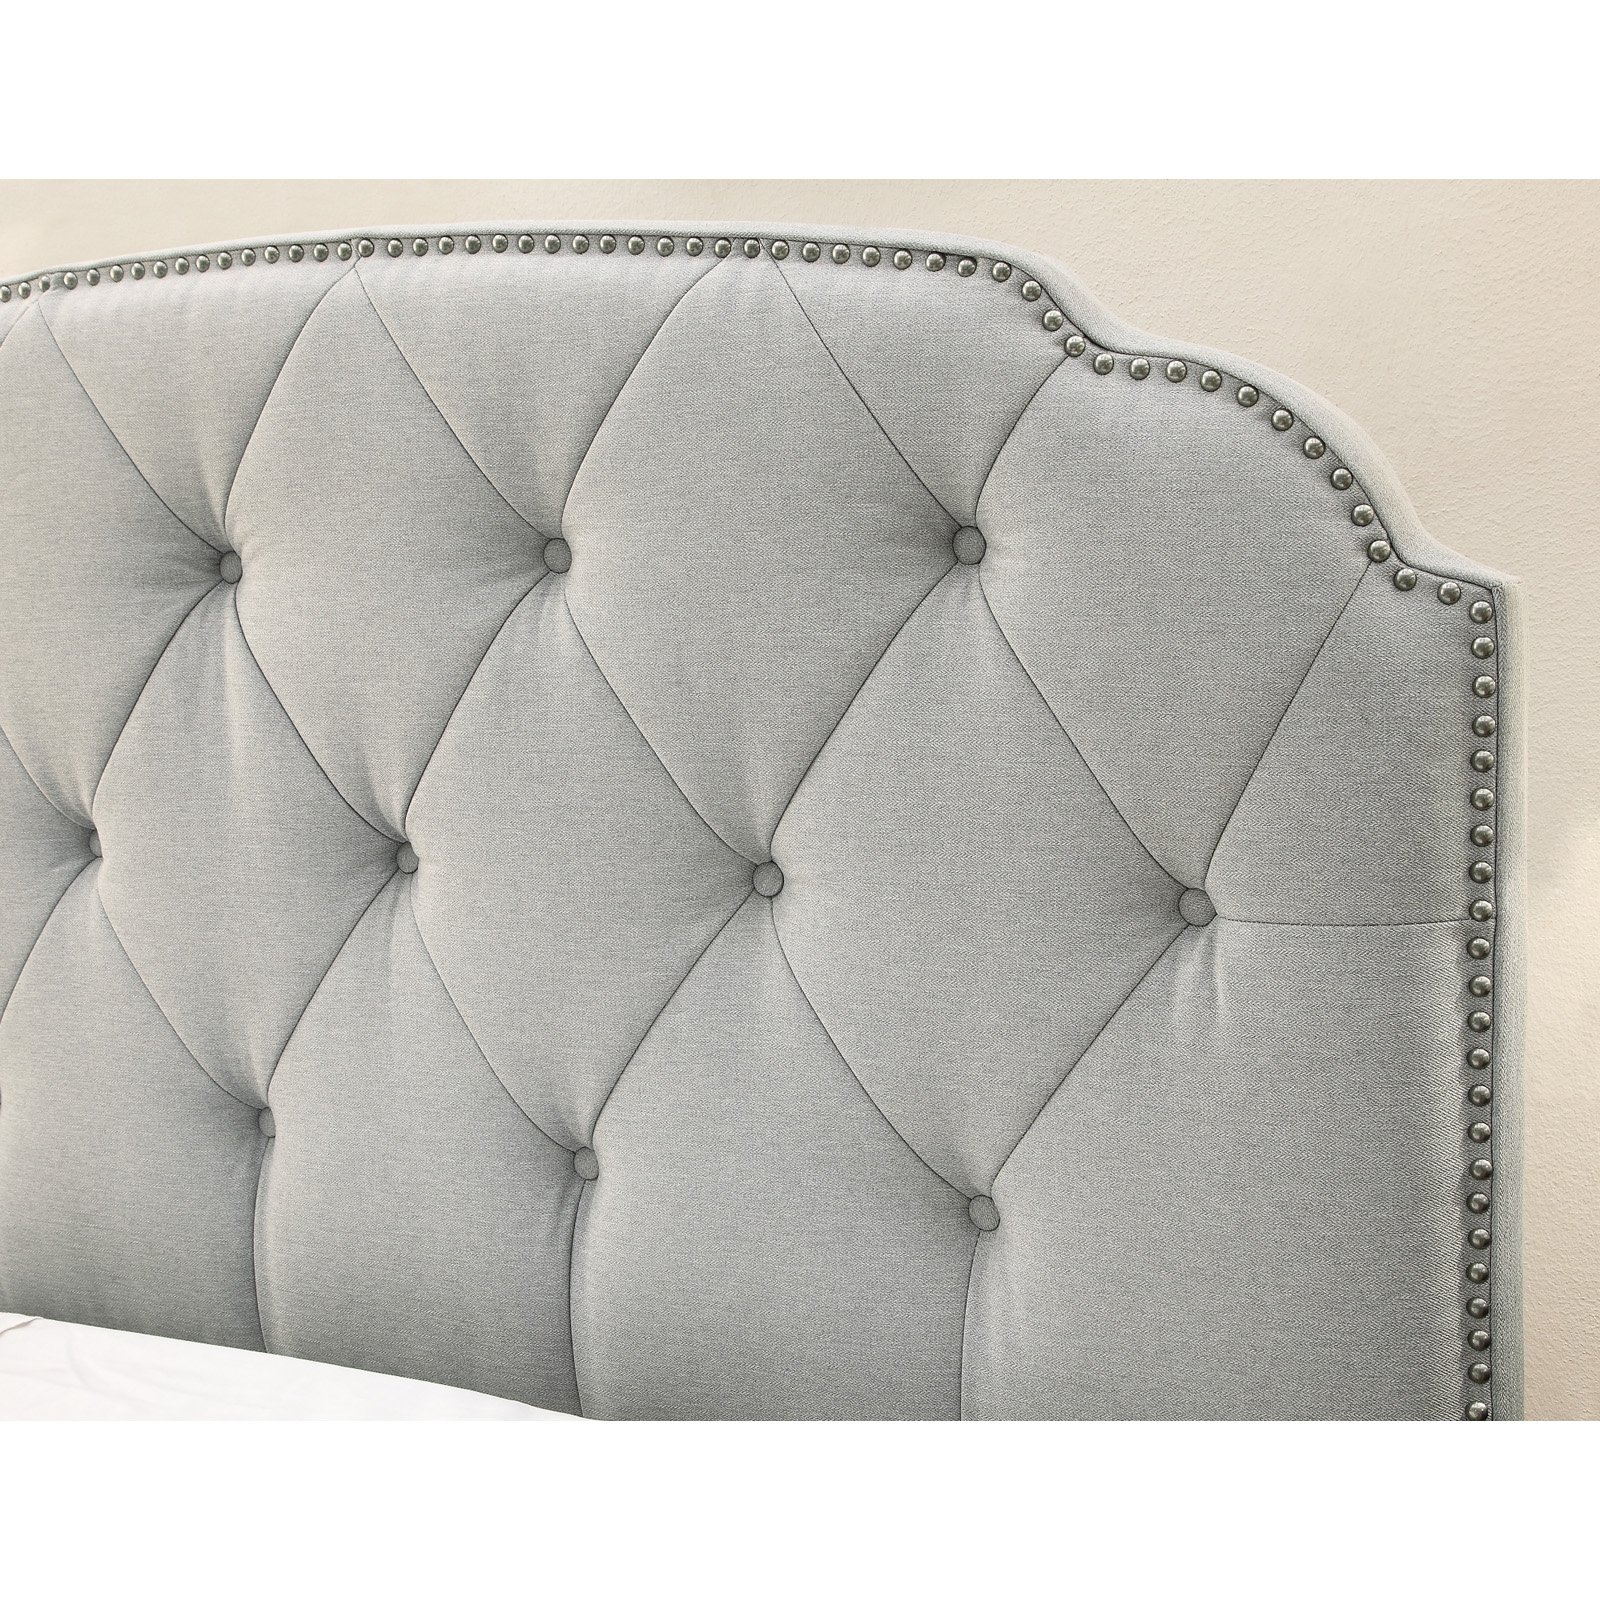 Trespass Marmor Tufted Nail Head Upholstered Bed - Queen - image 3 of 4